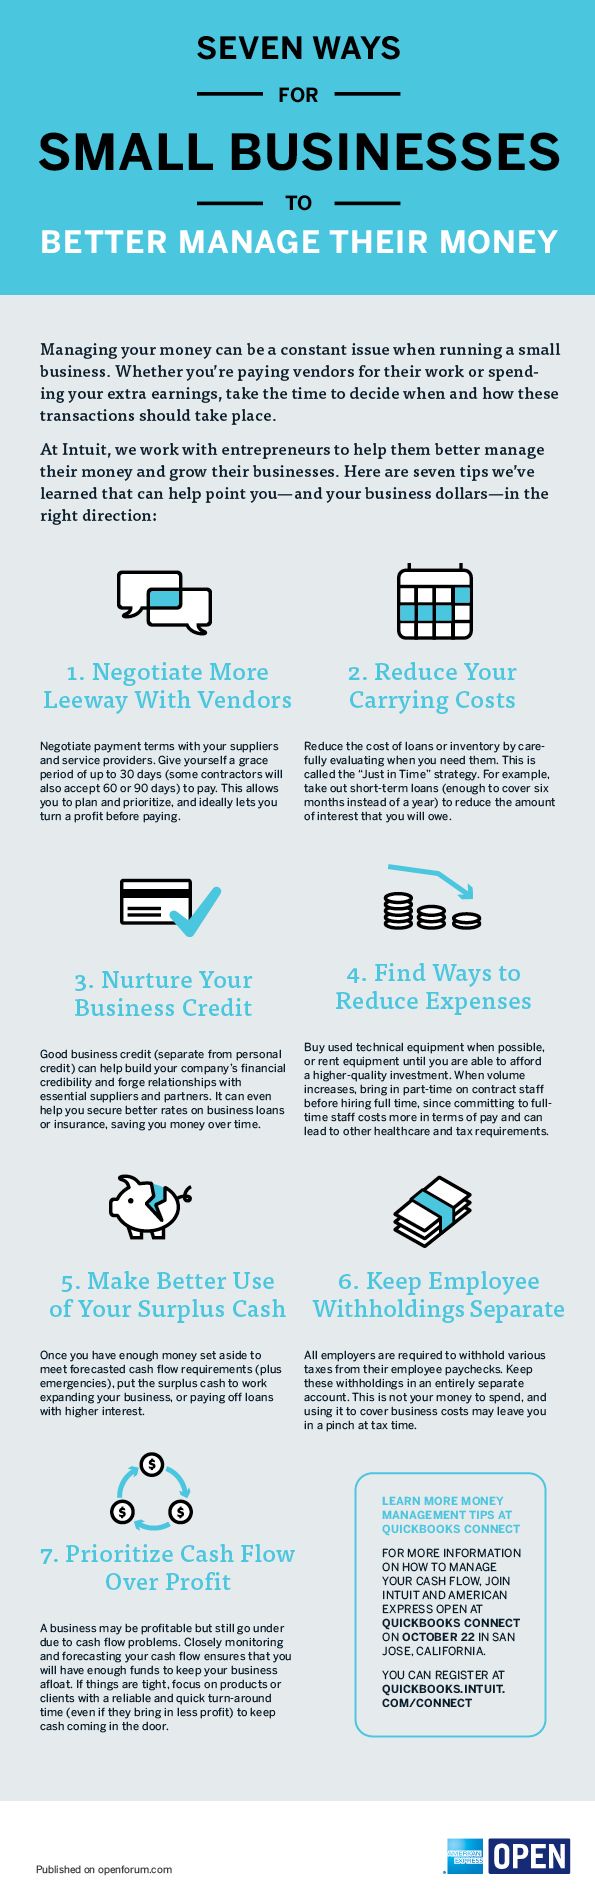 7 Ways for Small Businesses to Better Manage Their Money